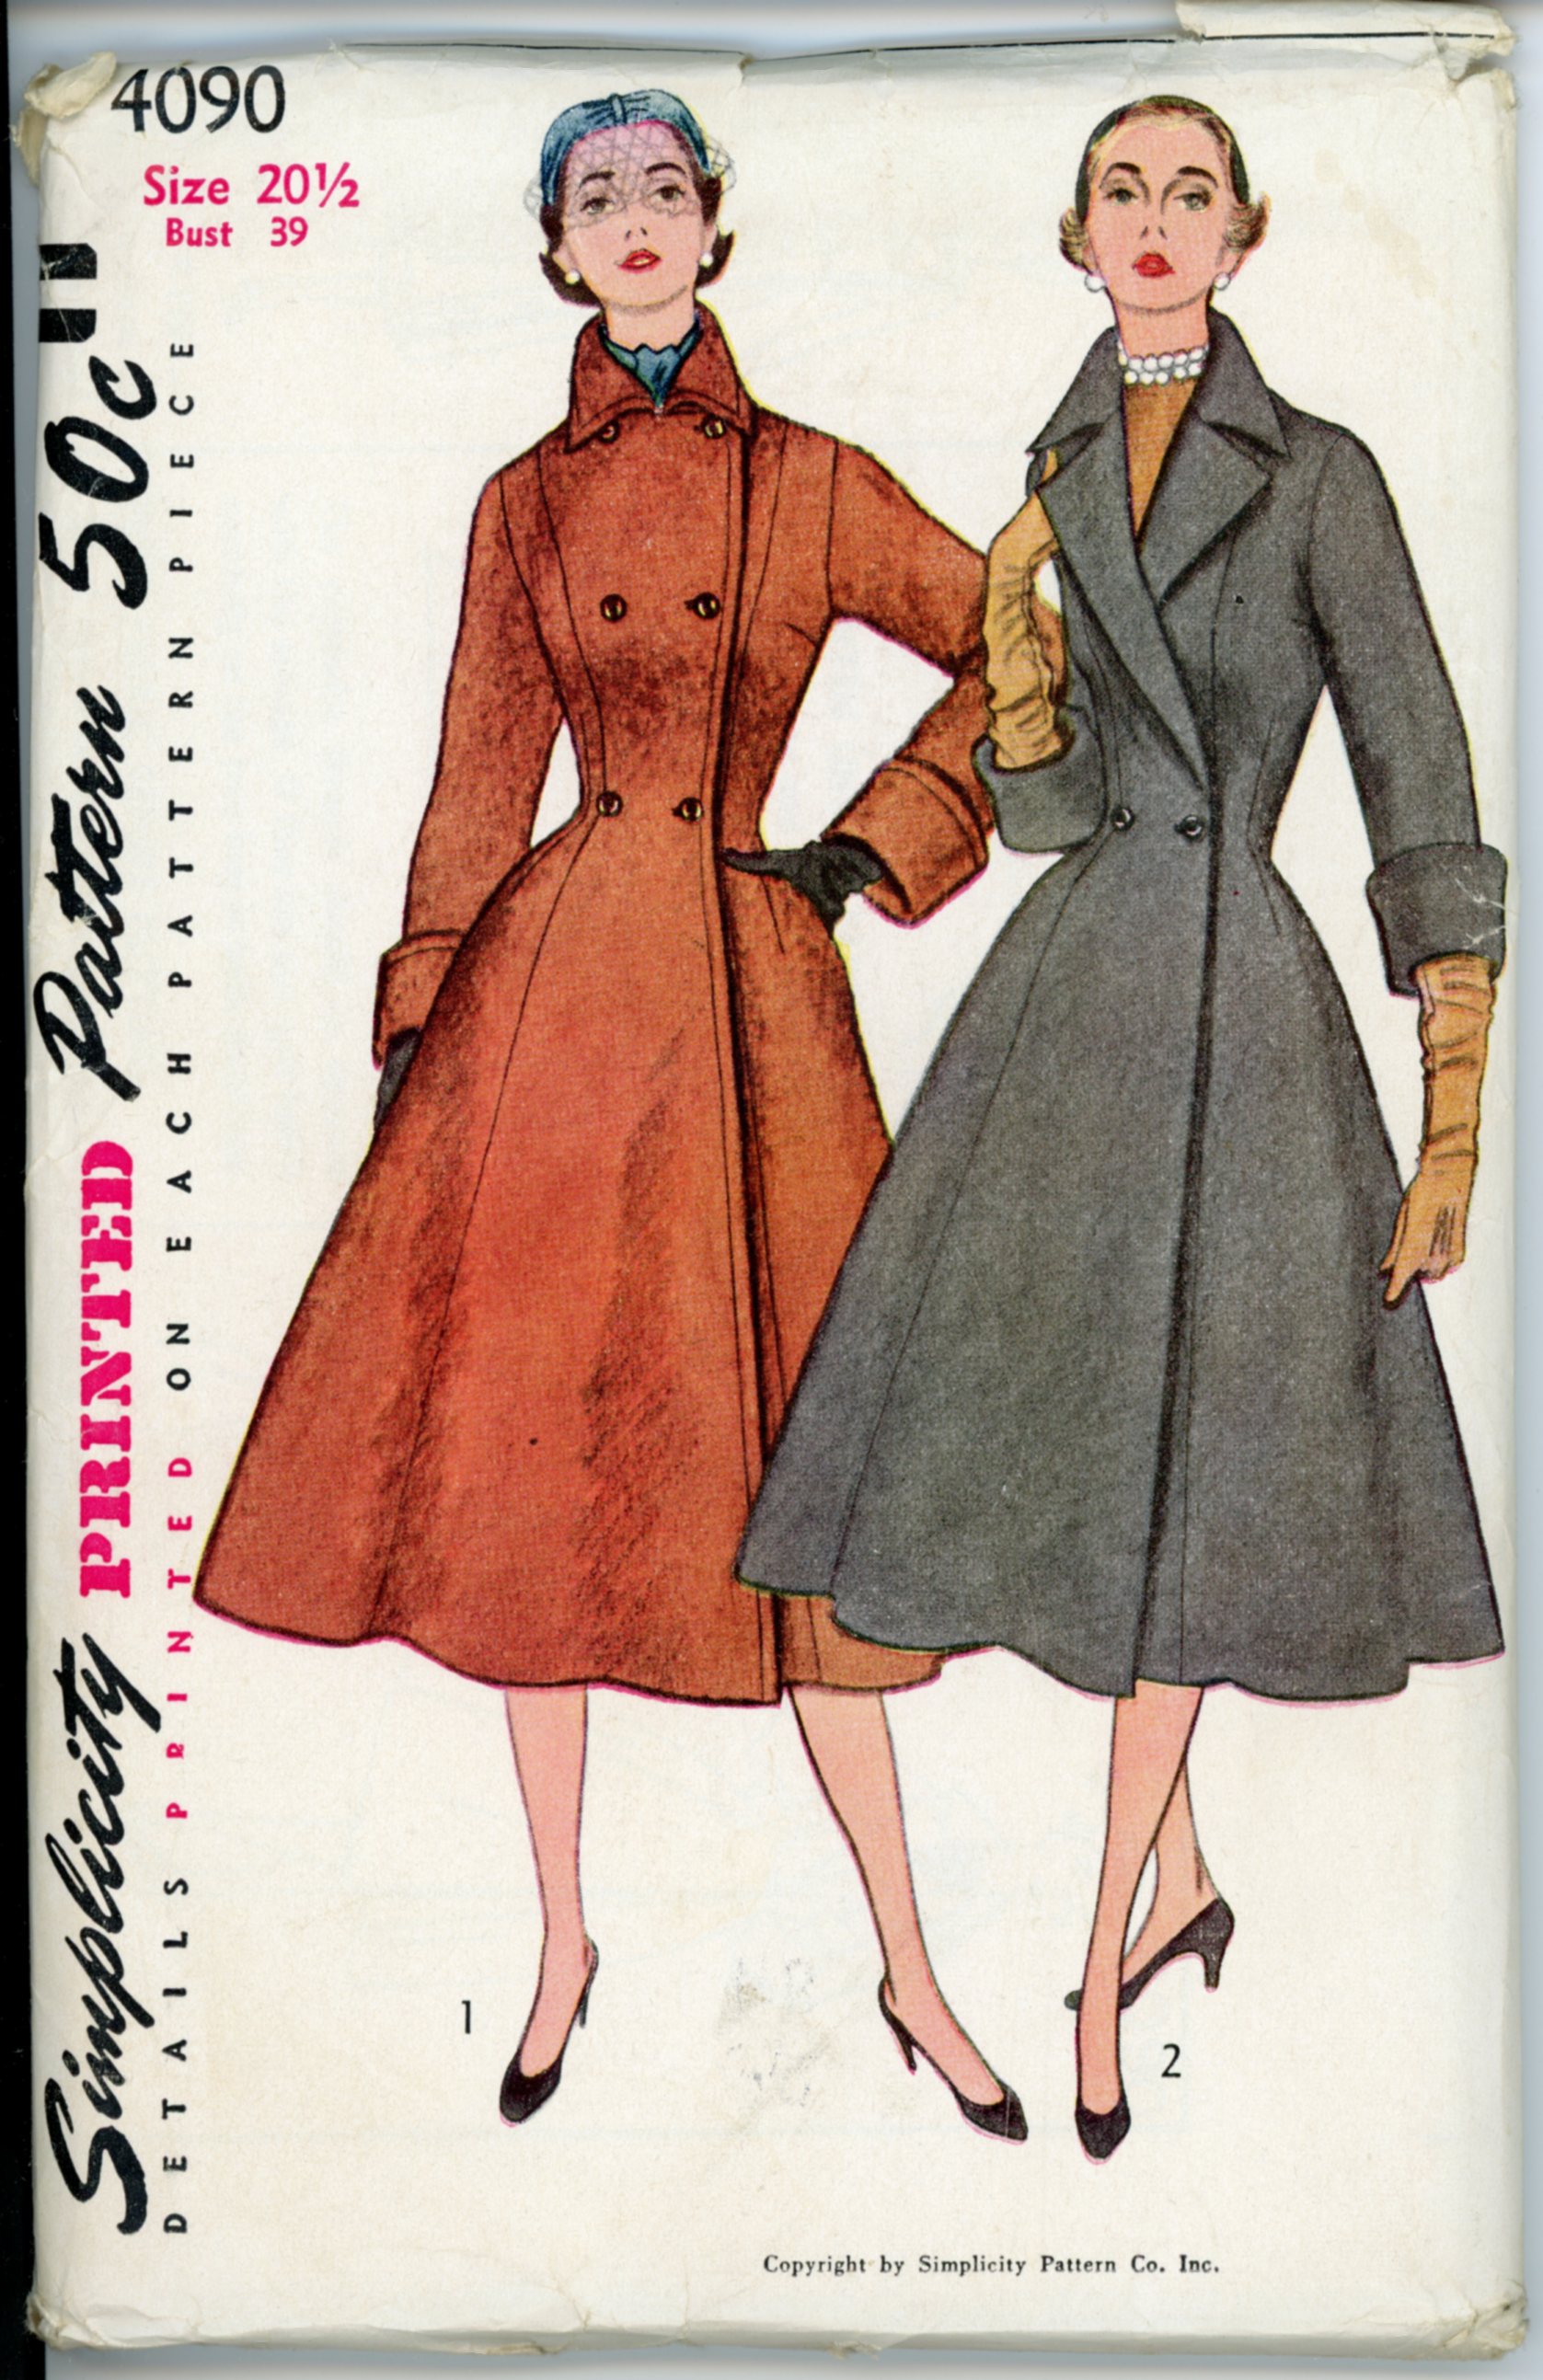 Simplicity 4090 B | Vintage Sewing Patterns | FANDOM powered by Wikia